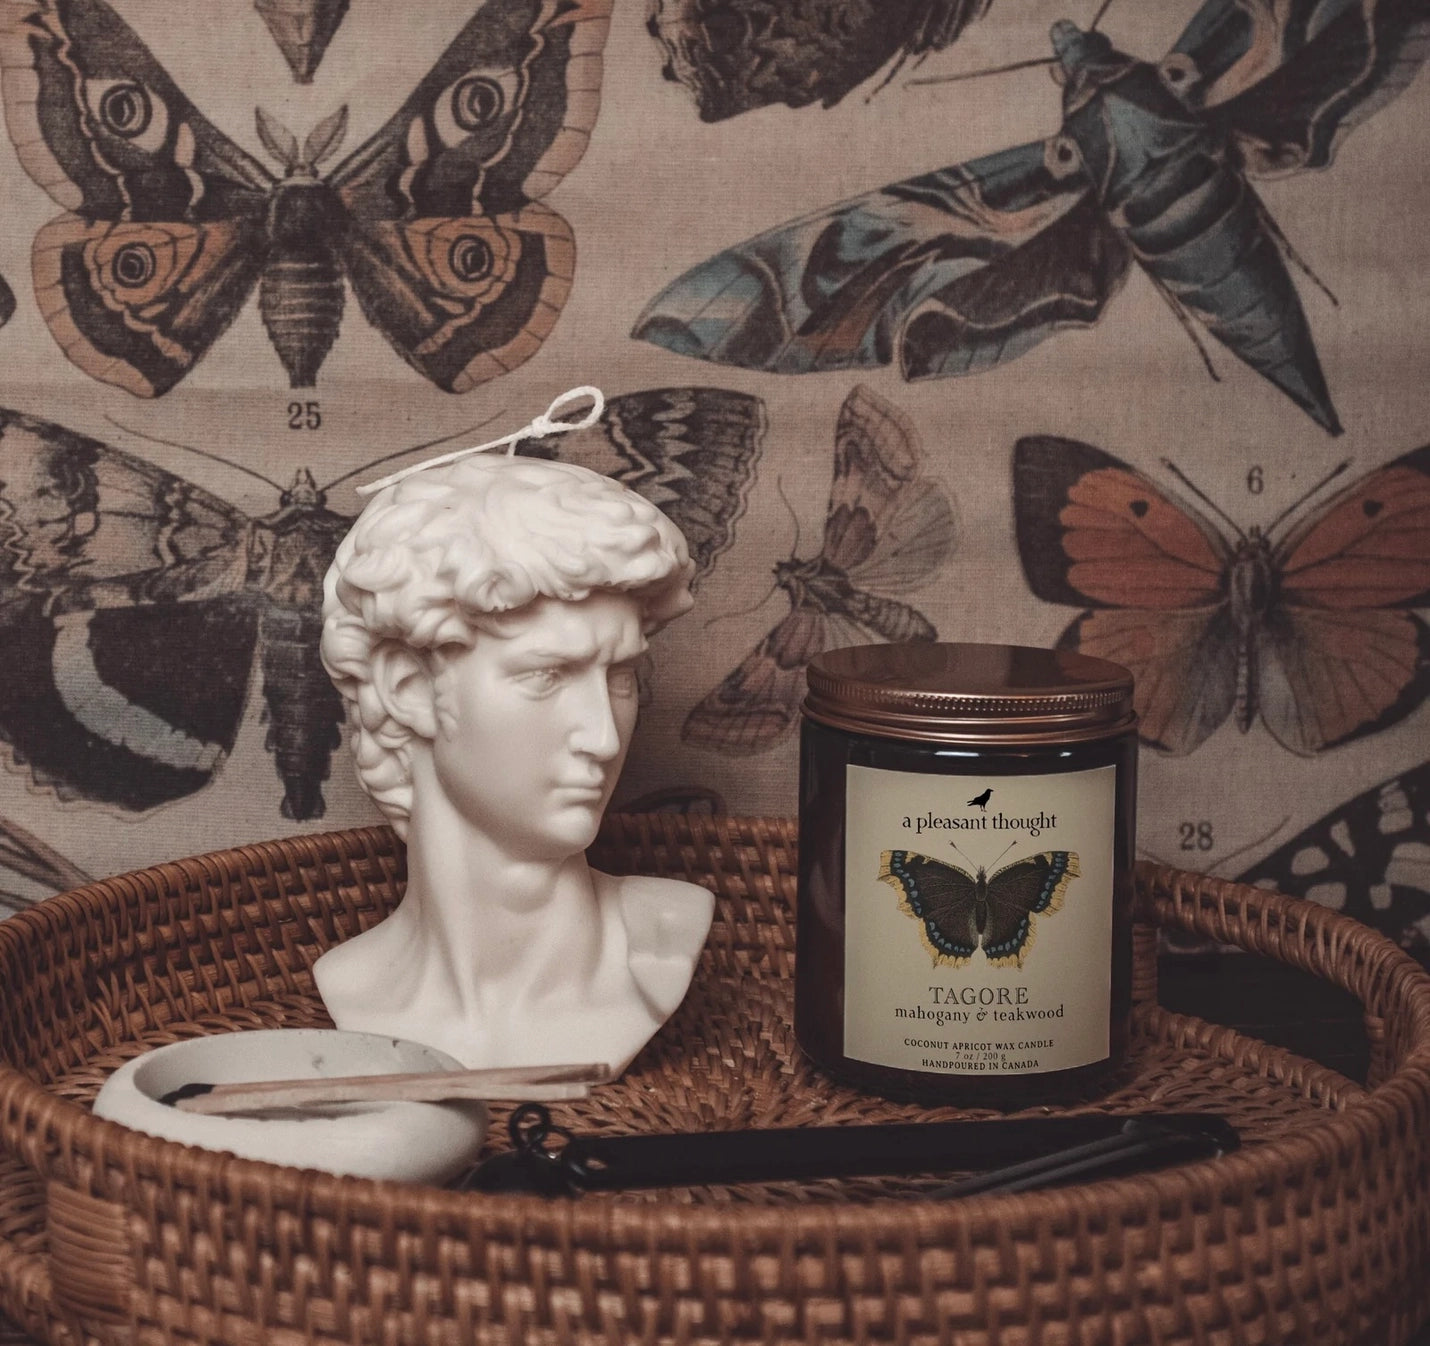 Tagore Candle